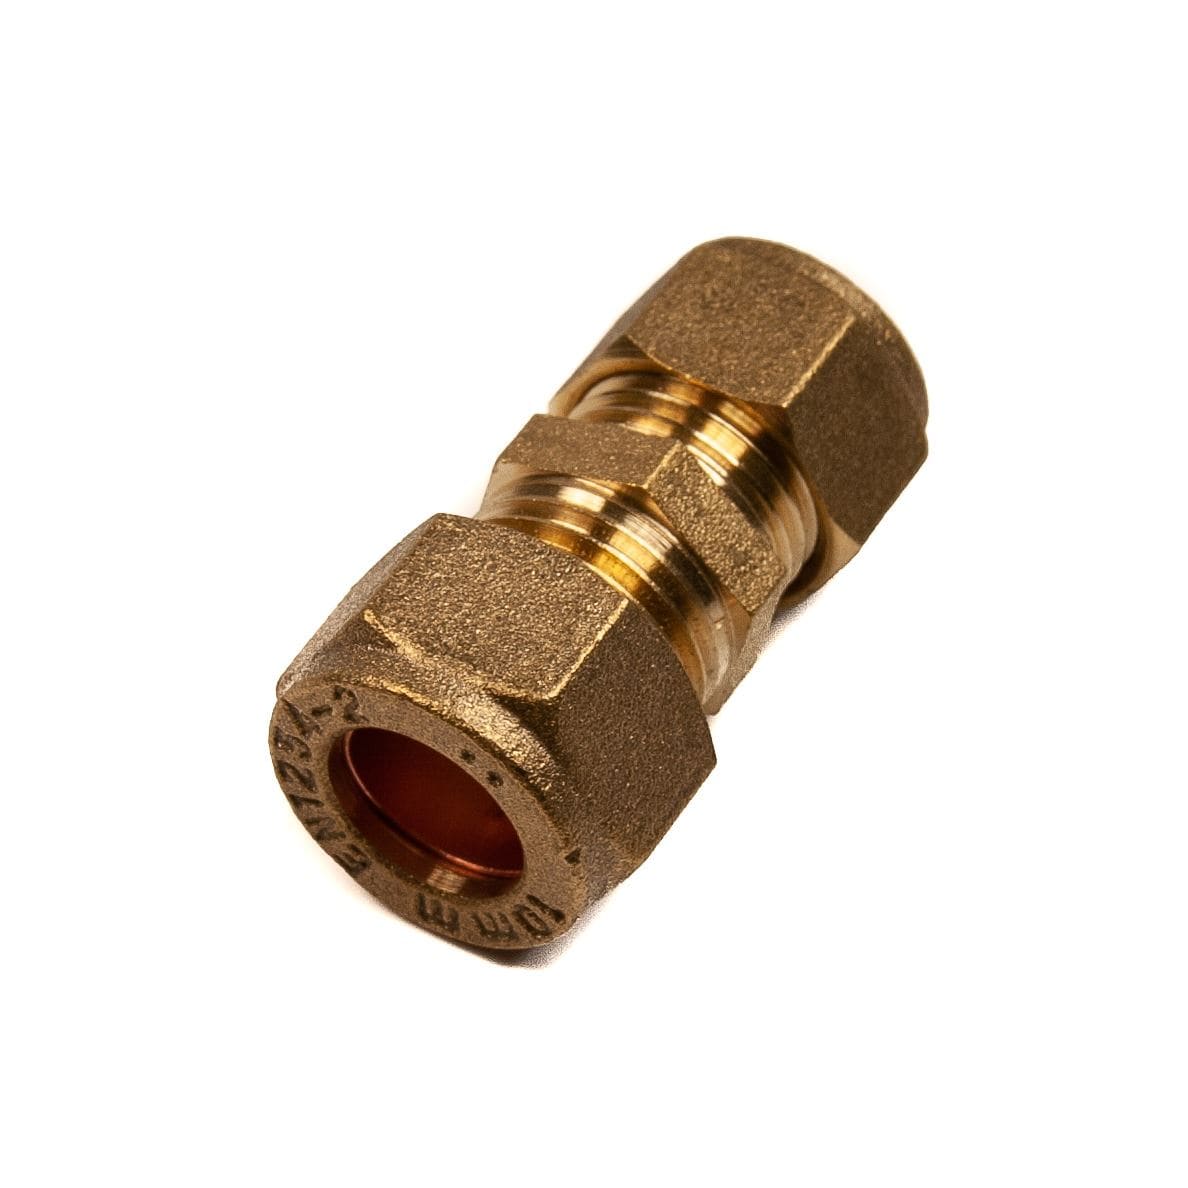 10mm x 8mm Compression Reducer Coupling Brass Compression Reducing Couplings Thunderfix 100102